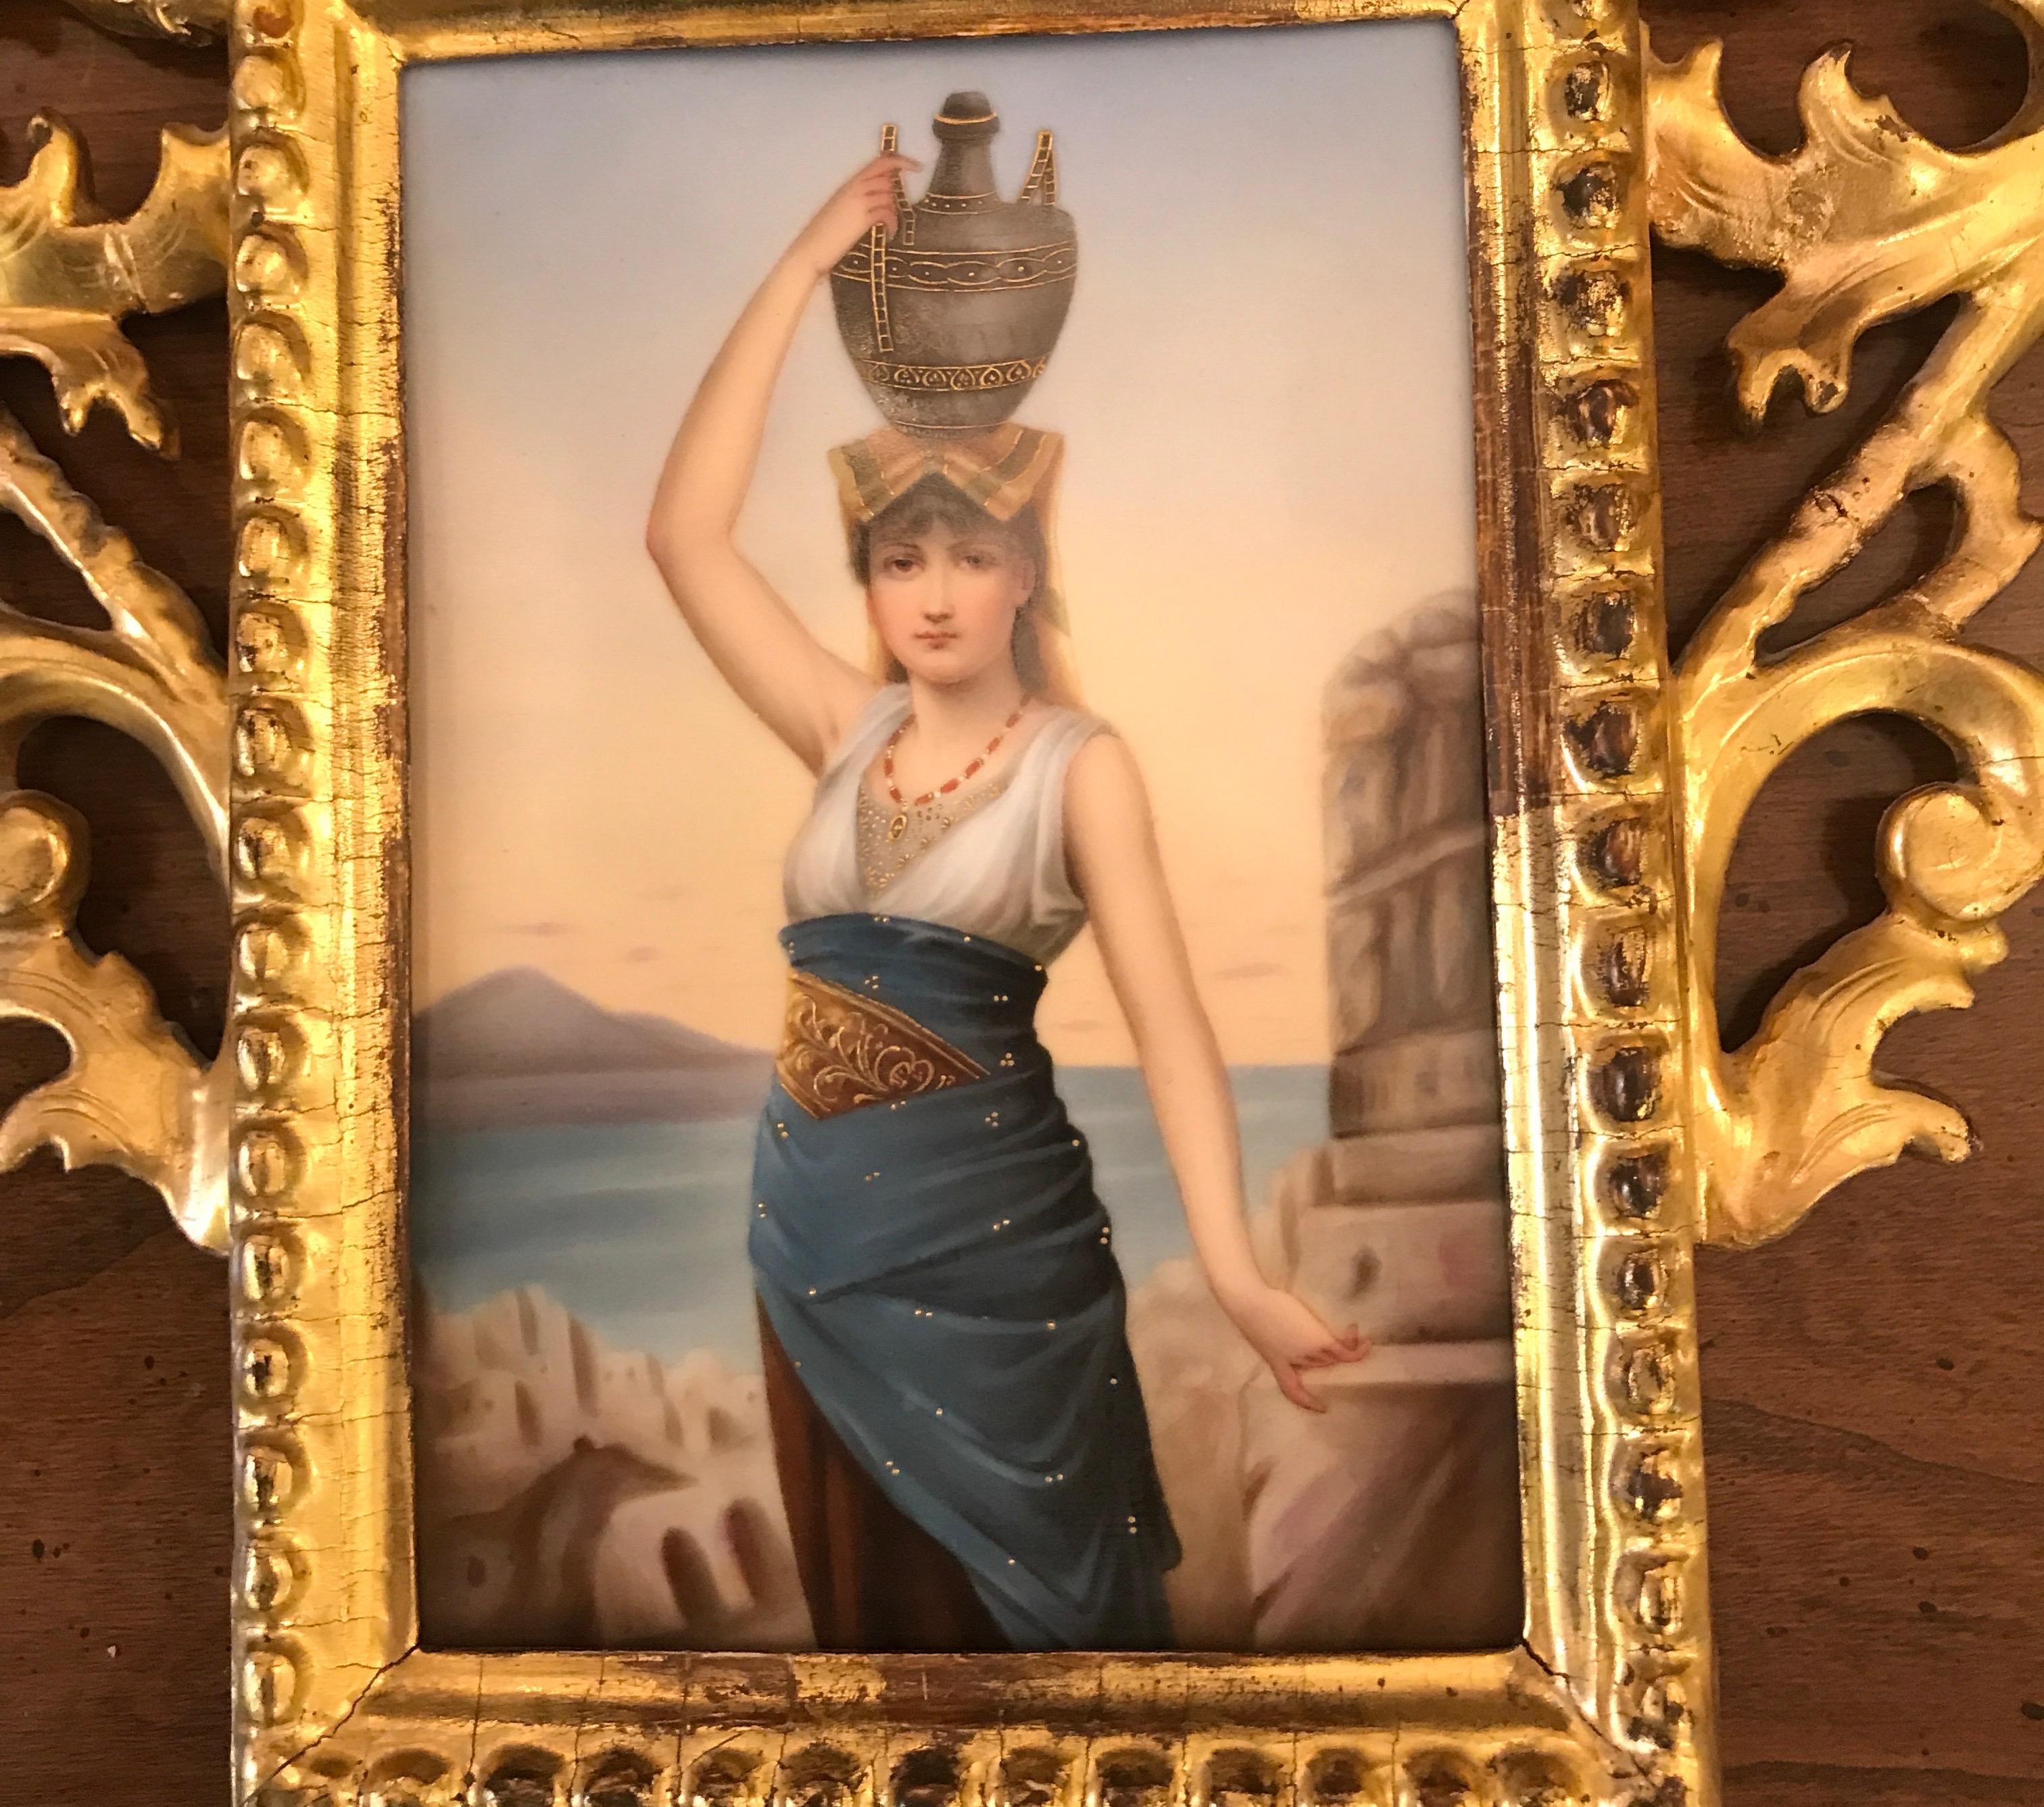 The plaque depicting a woman in orientalist-style dress after The Pompeiian by Nathaniel Sichel (German, 1843-1907) the giltwood Italian frame measures 12 high, 10 wide, the plaque measuring 6 high, 4.25 wide. The stunning detail on the hand painted